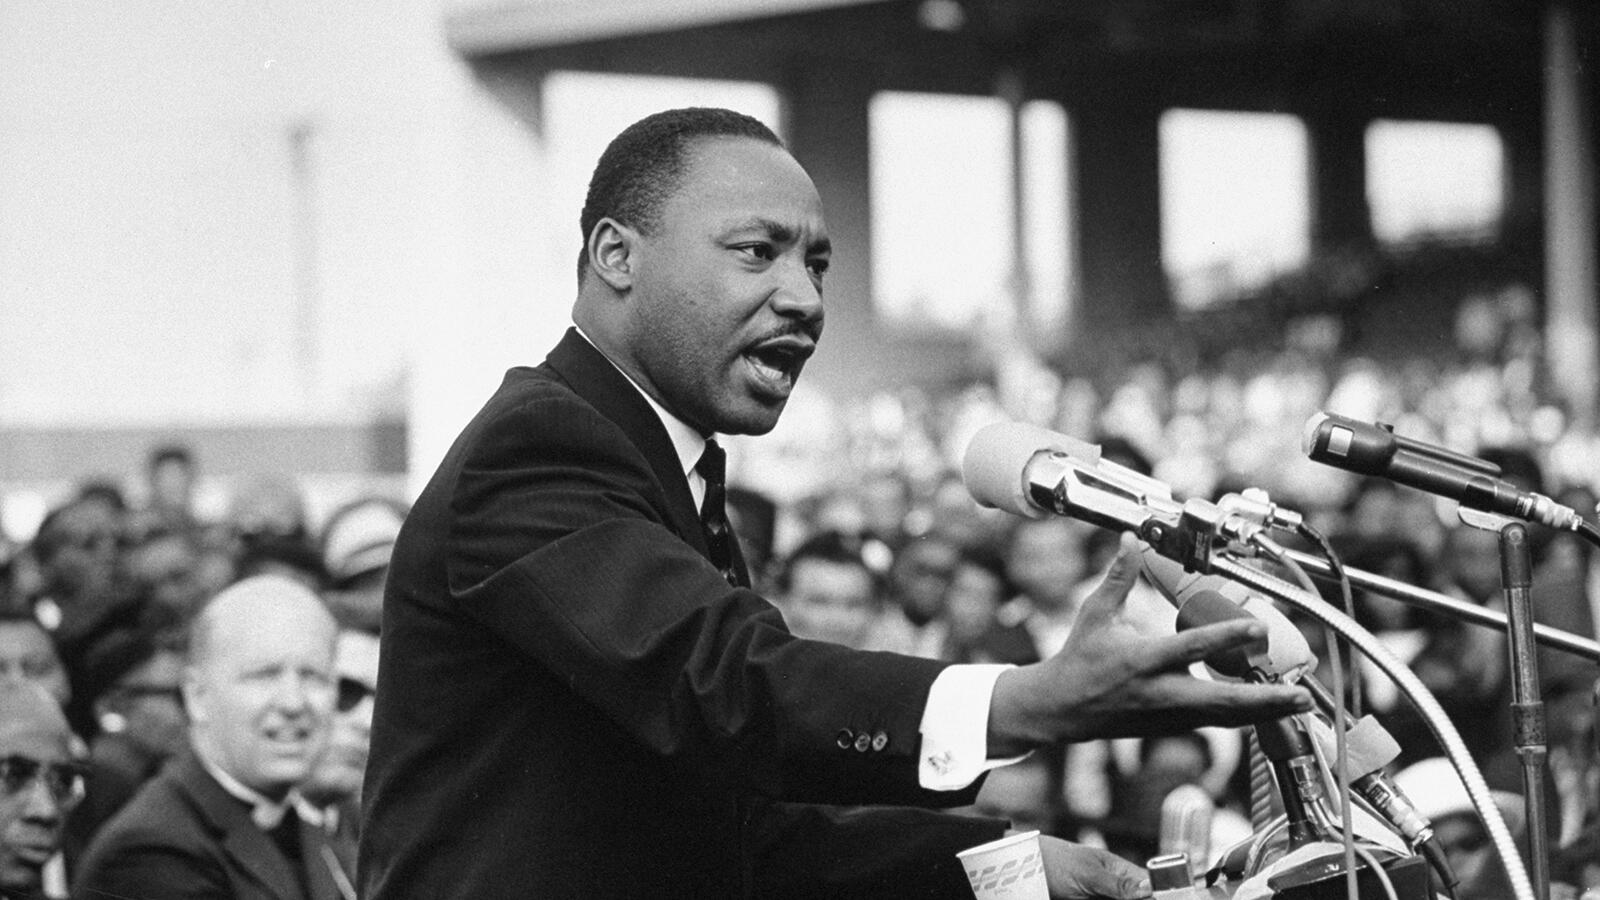 Rev. Dr. Martin Luther King Jr. speaking.  (Photo by Julian Wasser//Time Life Pictures/Getty Images)